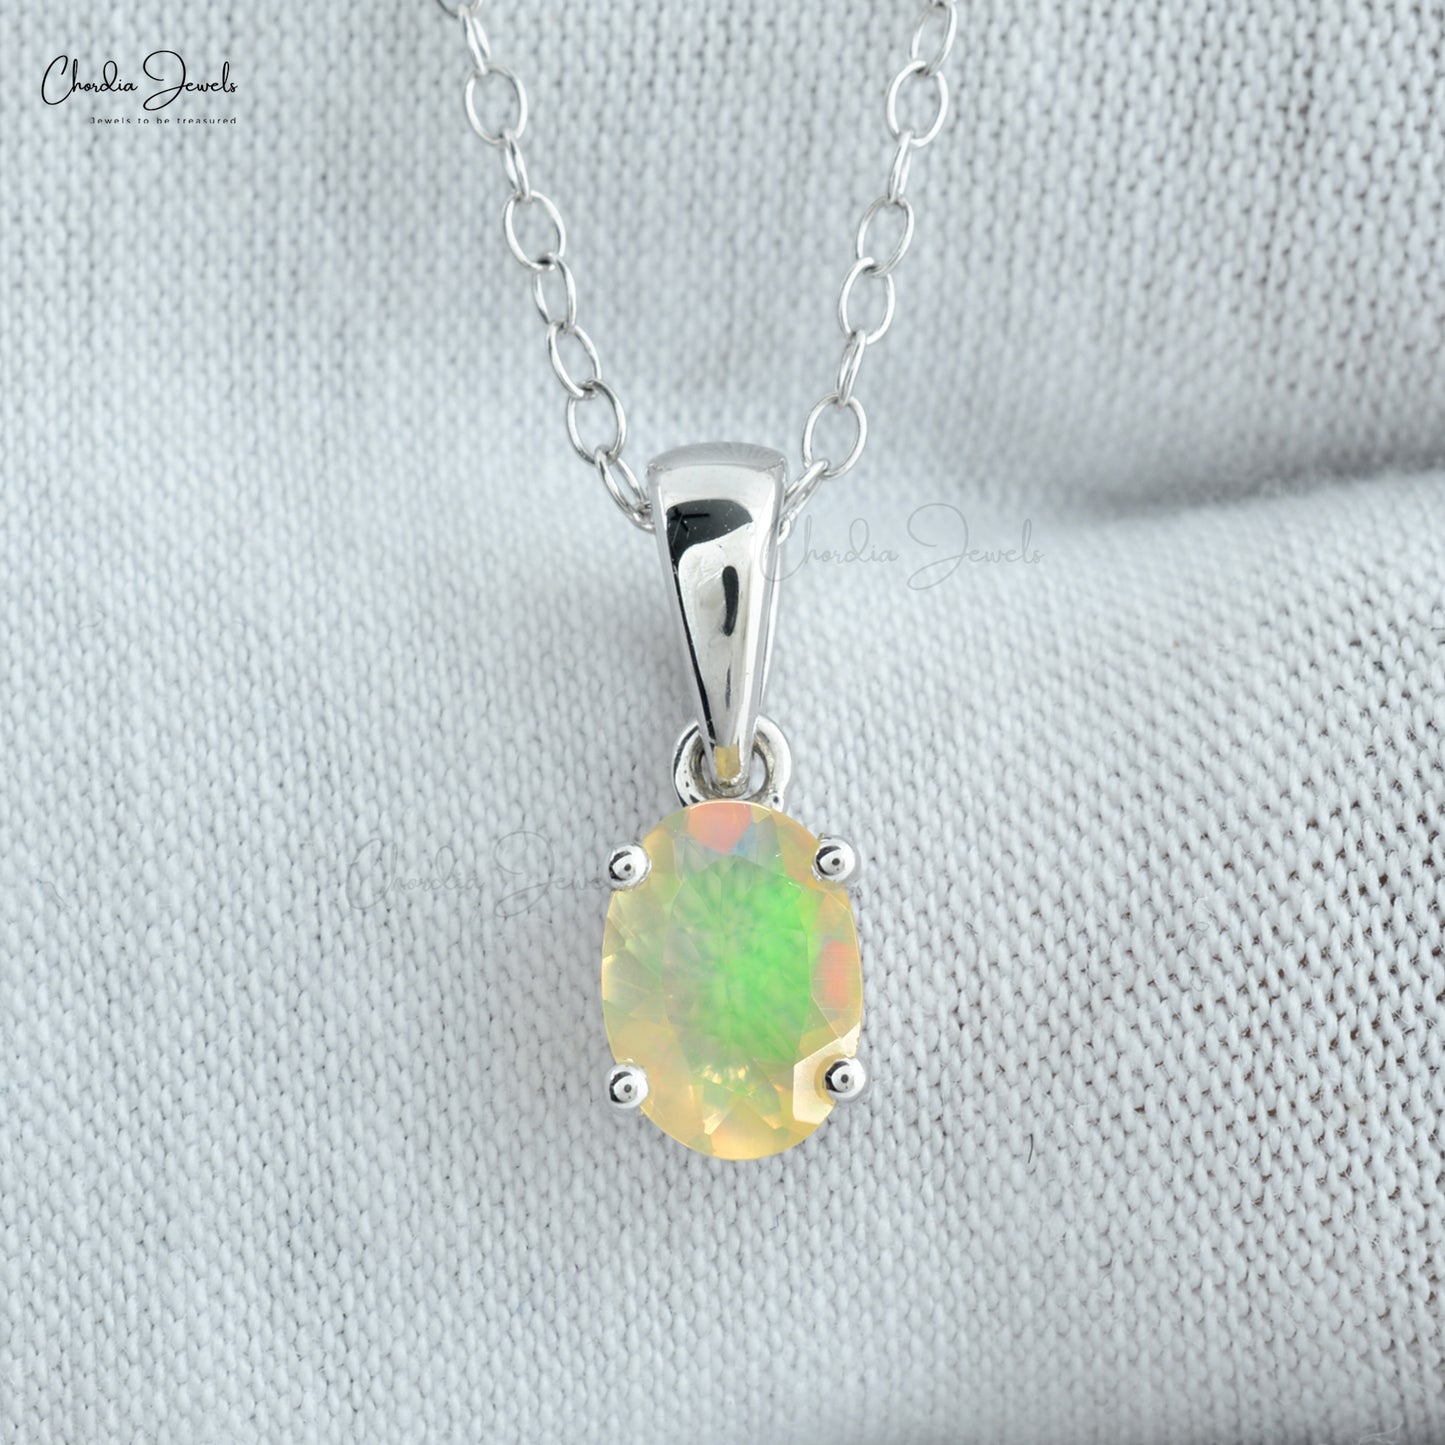 Natural Ethiopian Opal Pendant 14k Real White Gold Art Deco Pendant 7x5mm Oval Cut Gemstone Minimalistic Jewelry For Fiance Gift